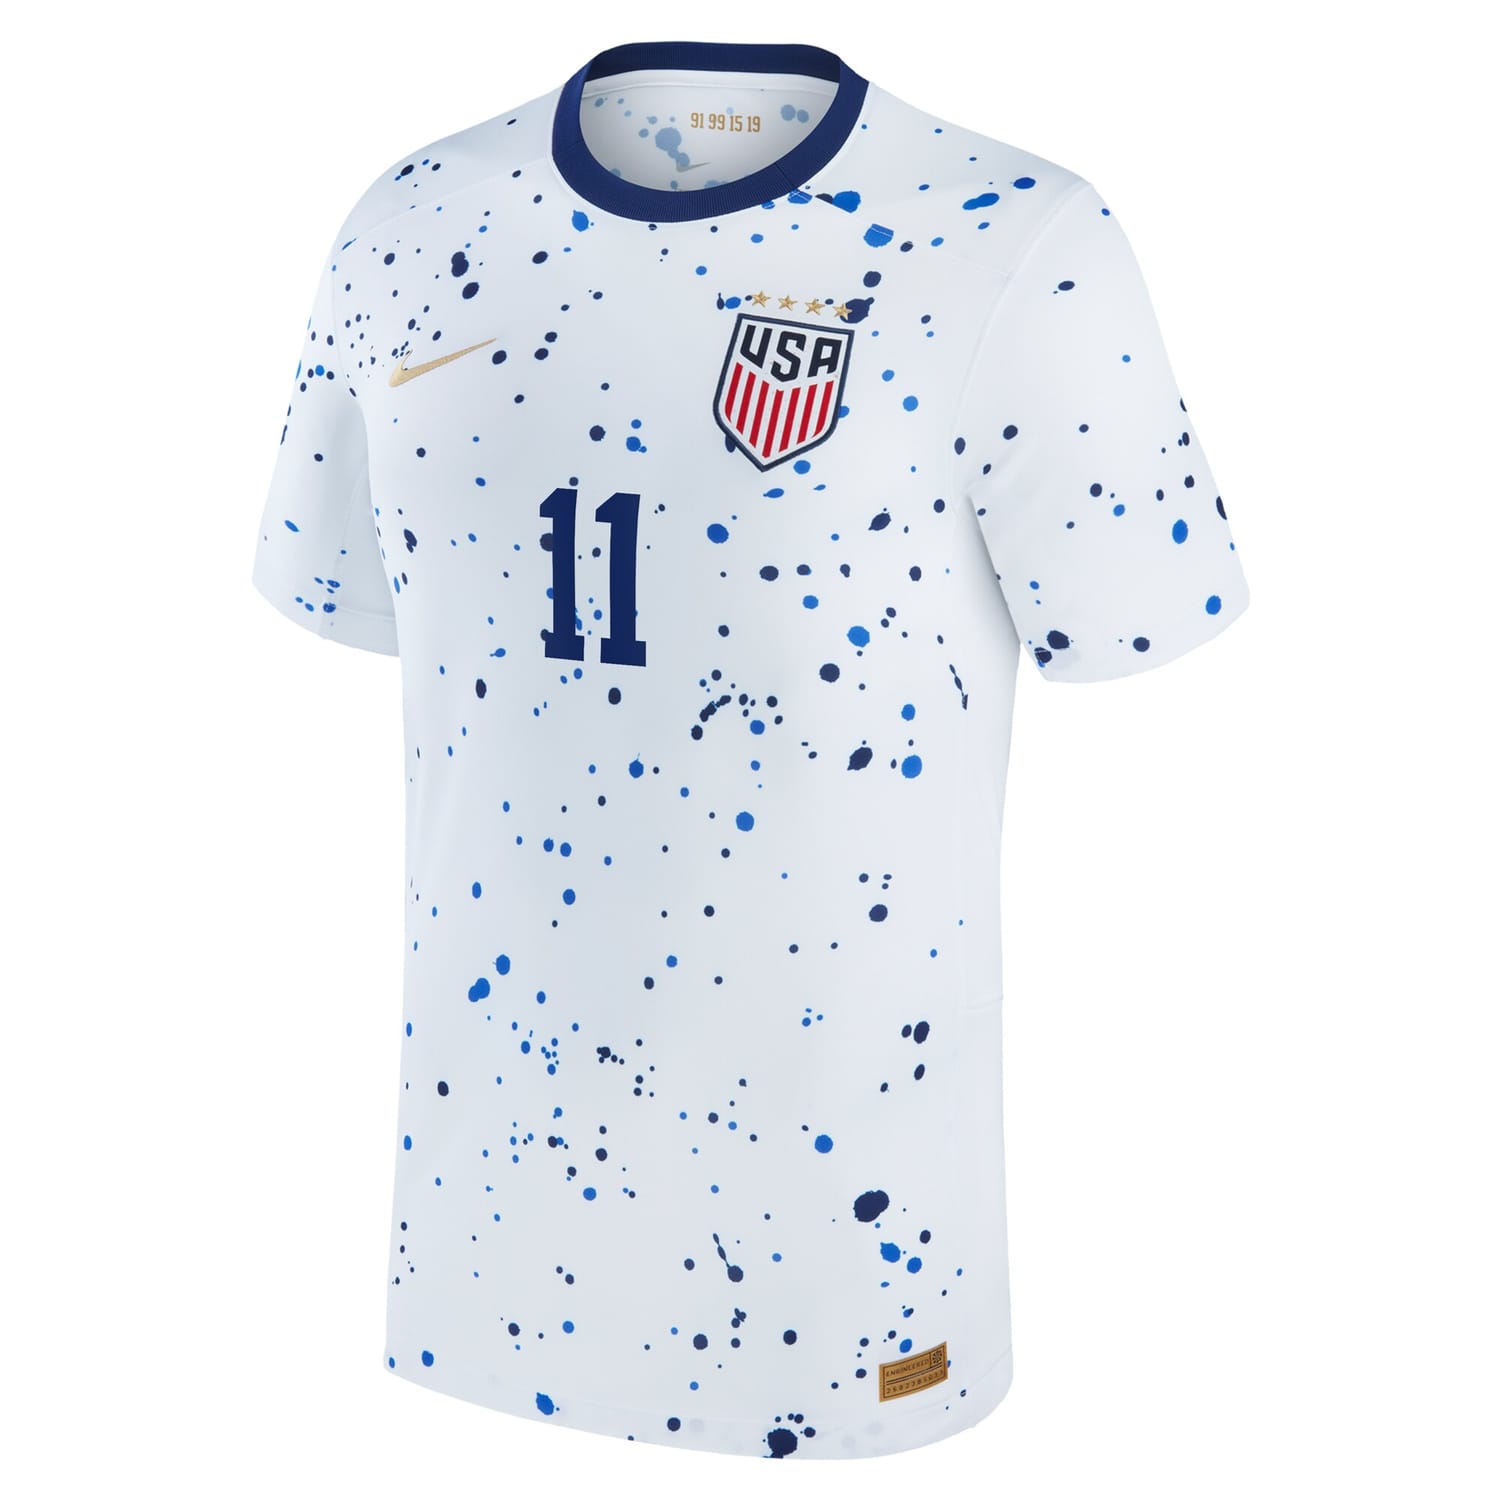 USWNT Home Jersey Shirt White 2023 player Sophia Smith printing for Men